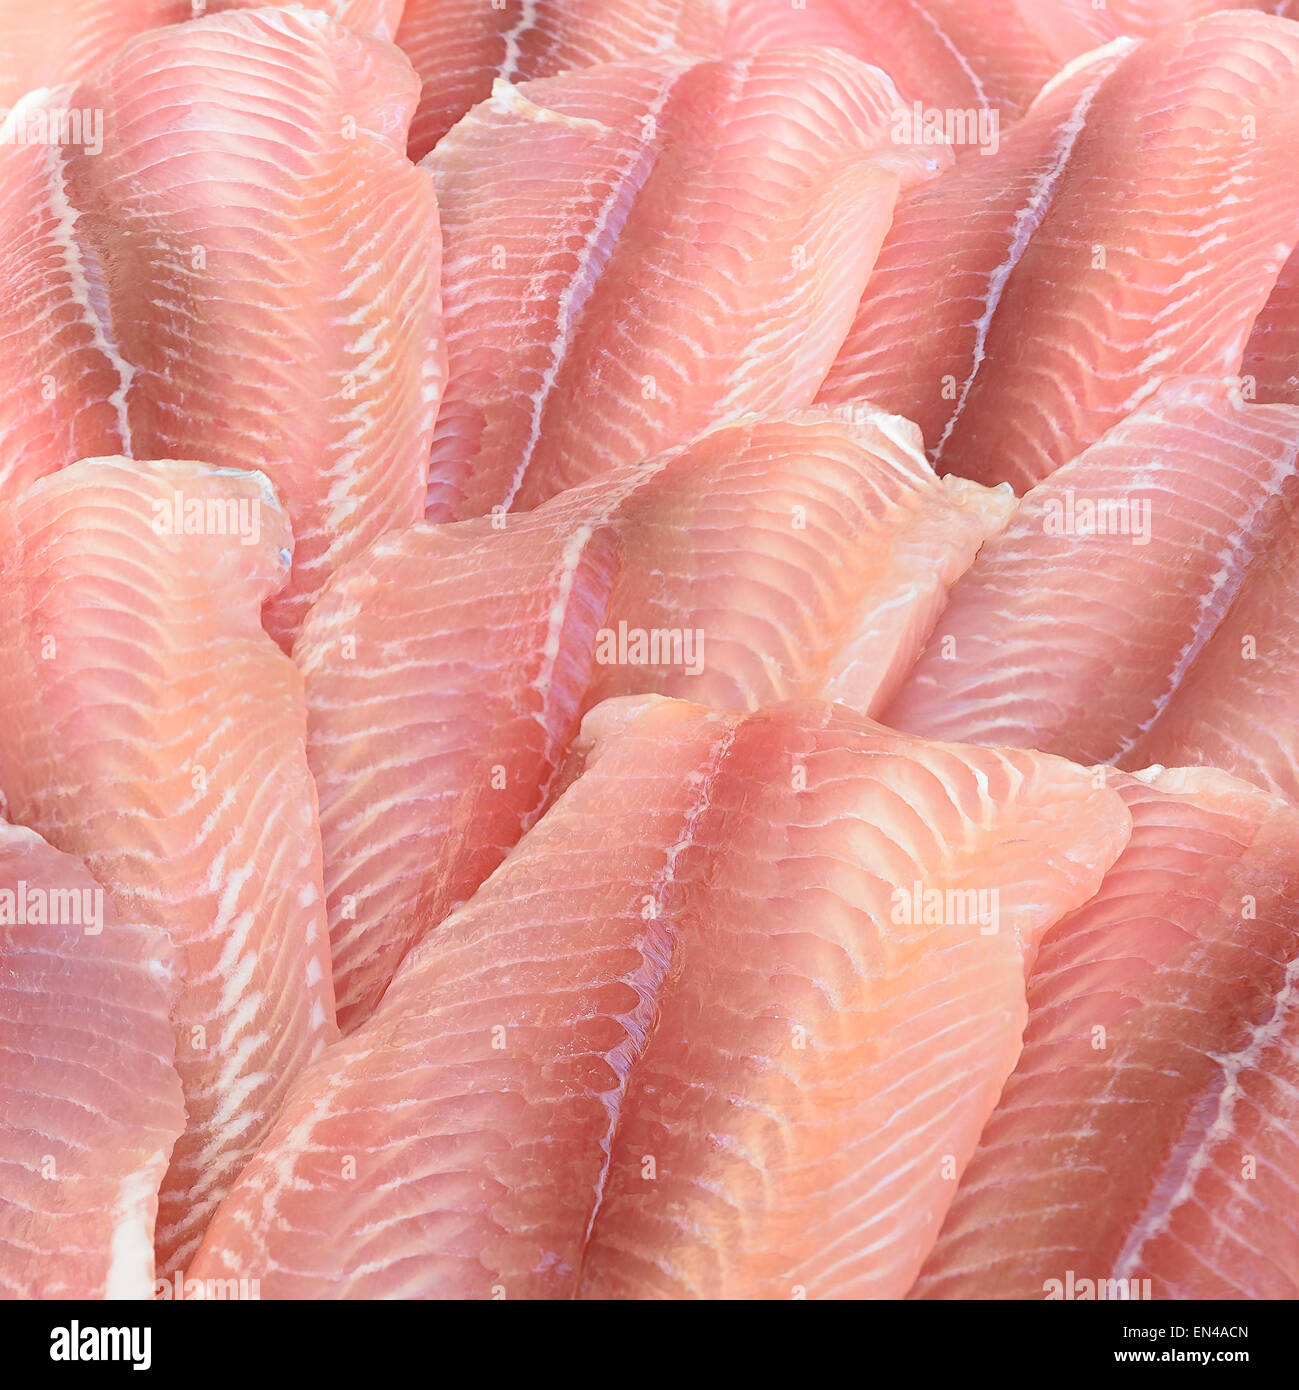 In the picture a group of pangasius fillets arranged in a row and pattern Stock Photo